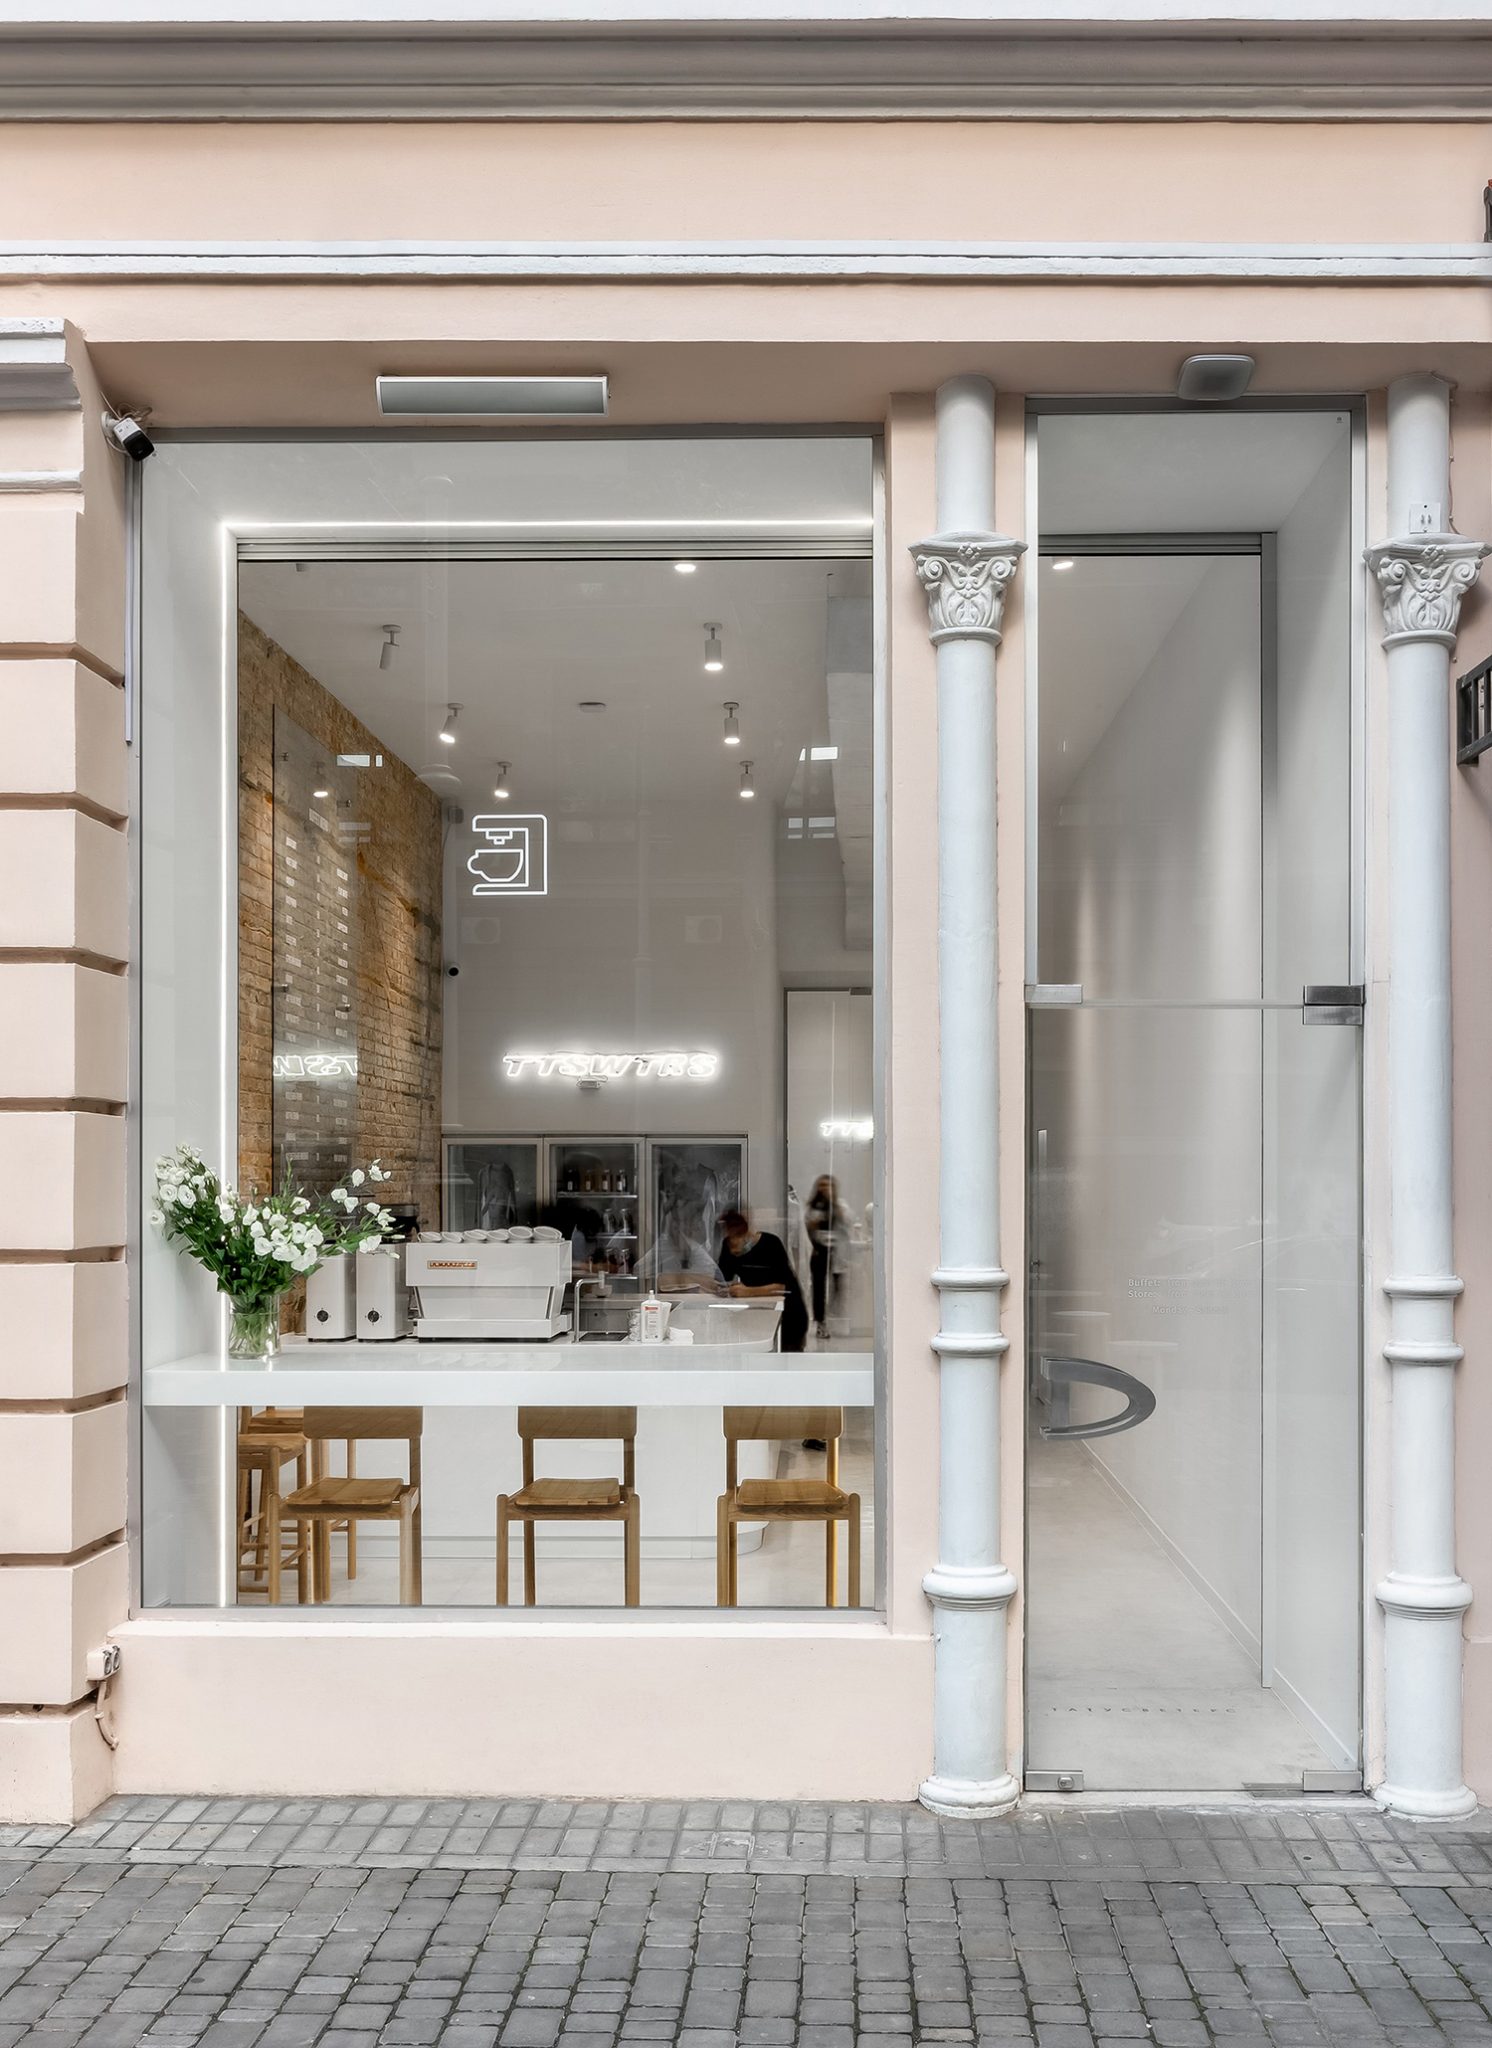 TTSWTRS showroom and coffee shop, Odesa, Ukraine / Aisel architects